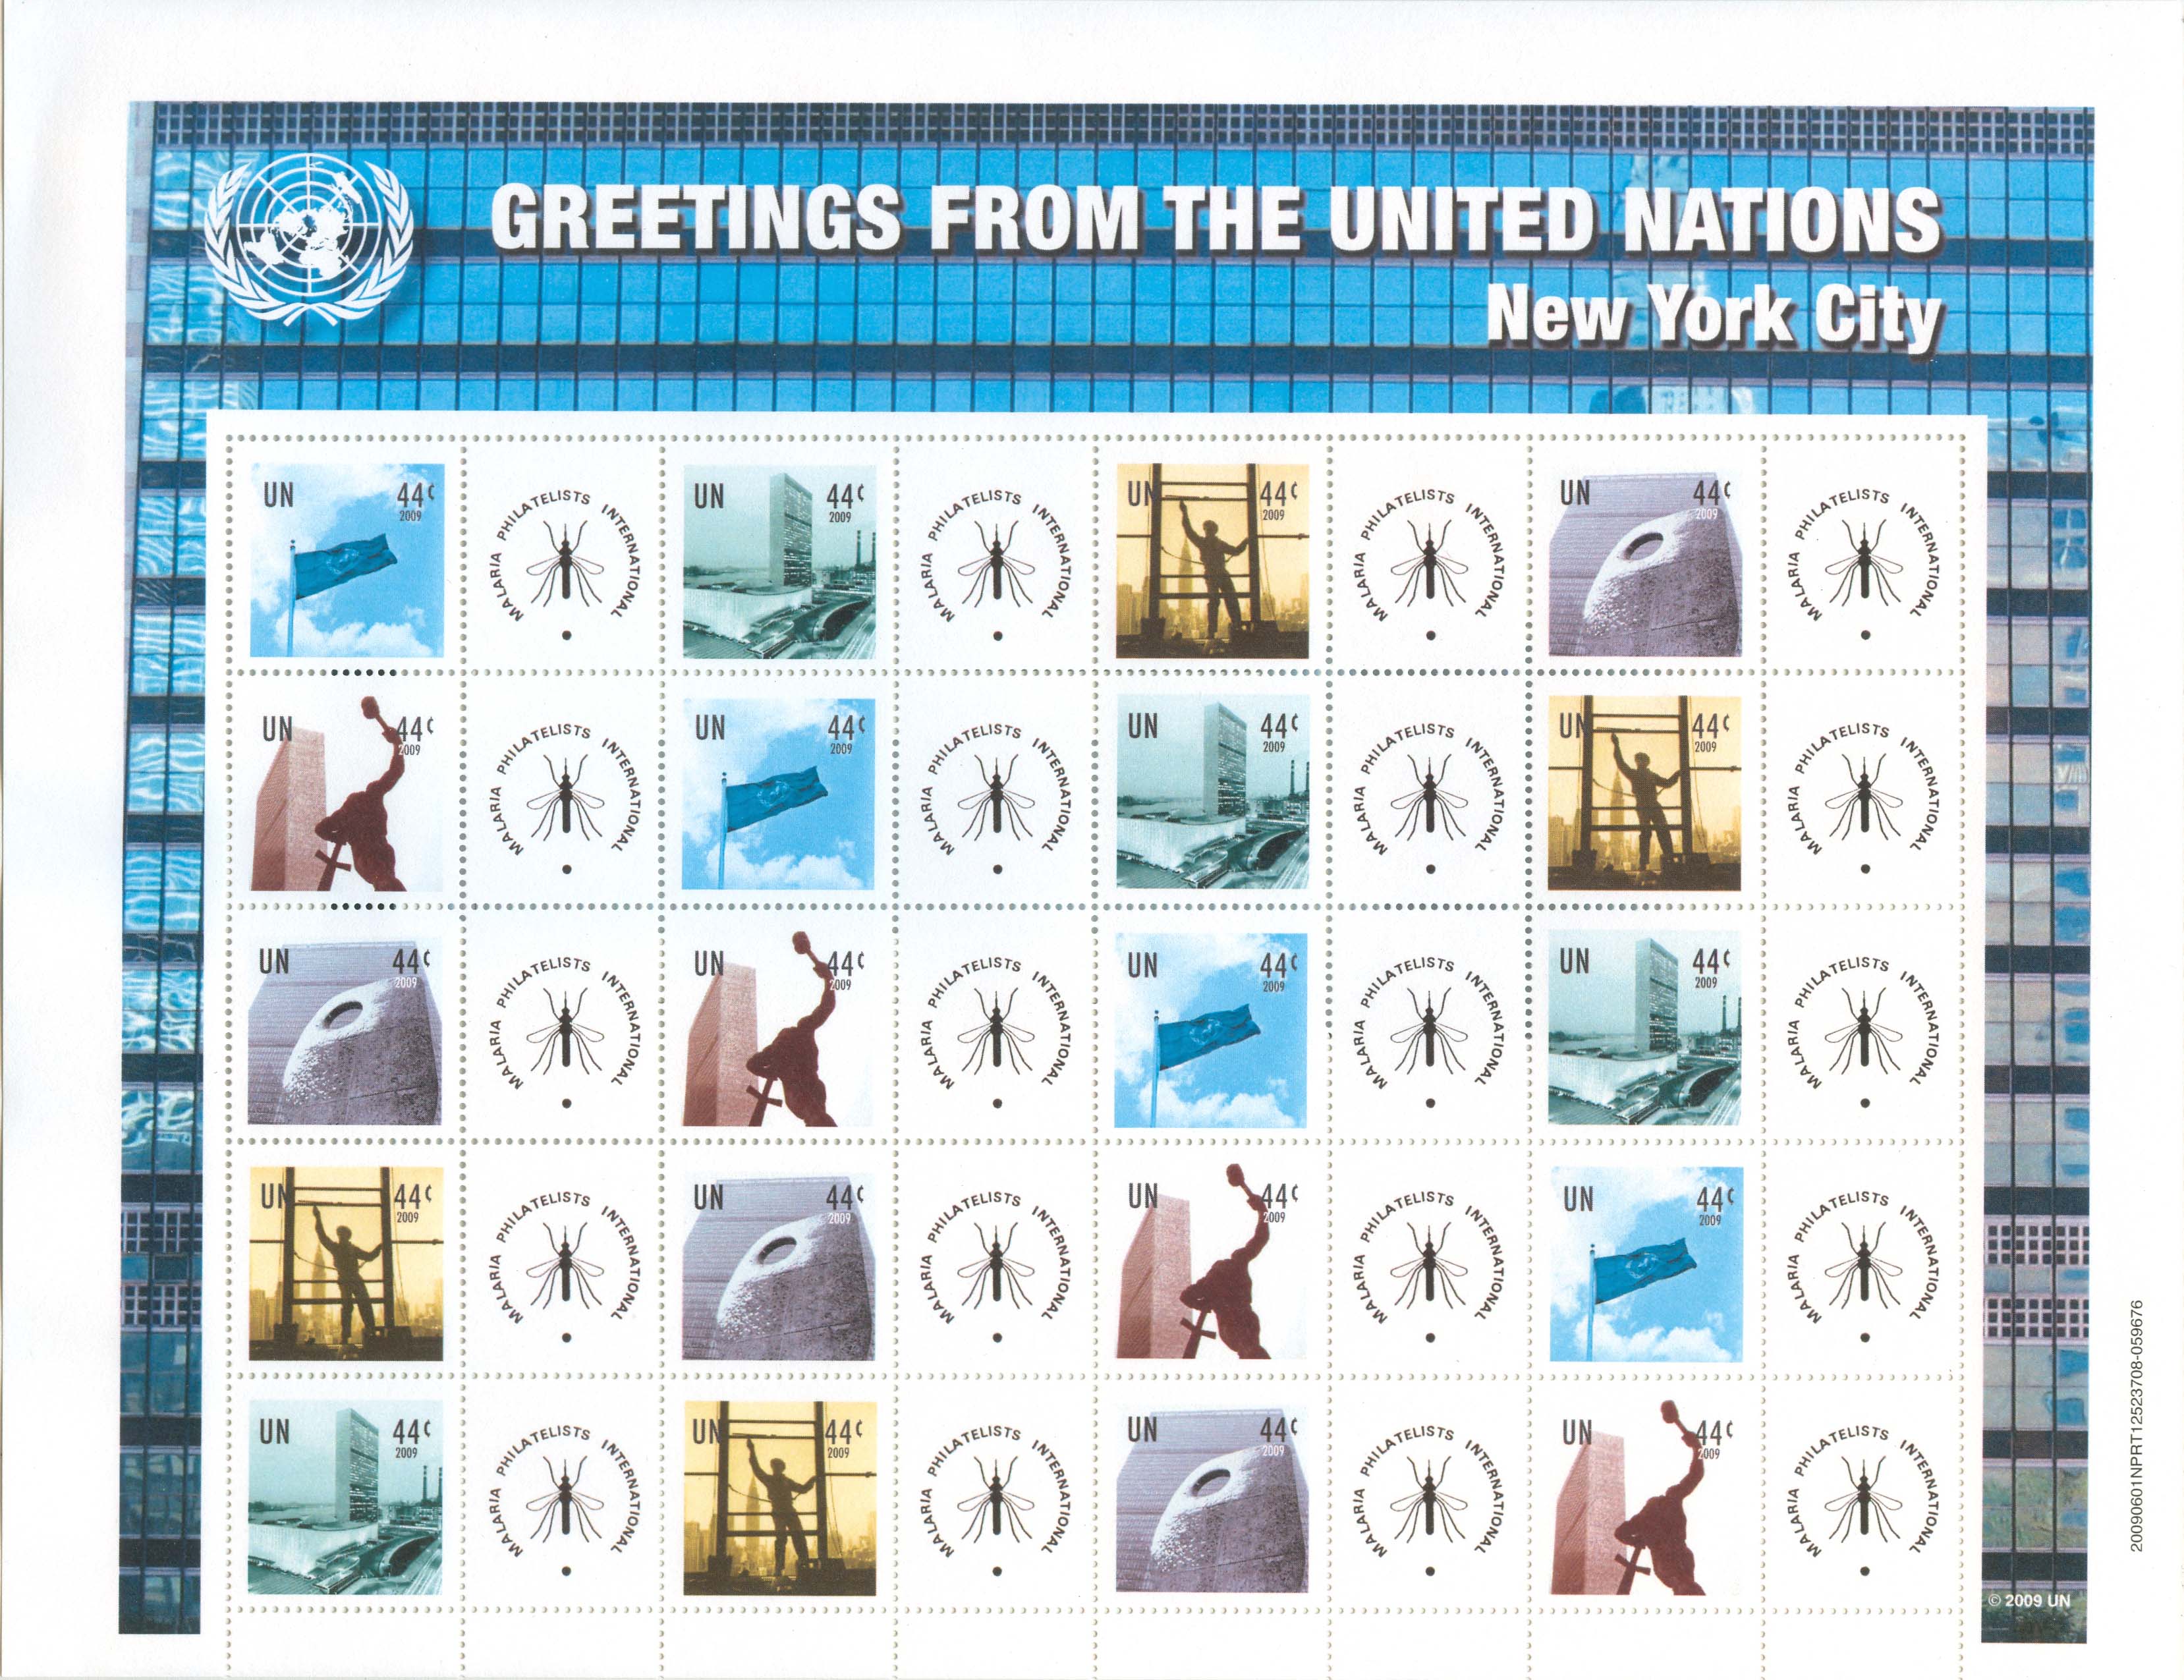 United Nations Personalized Sheet With MPI Logo - Issued June 5th, 2009